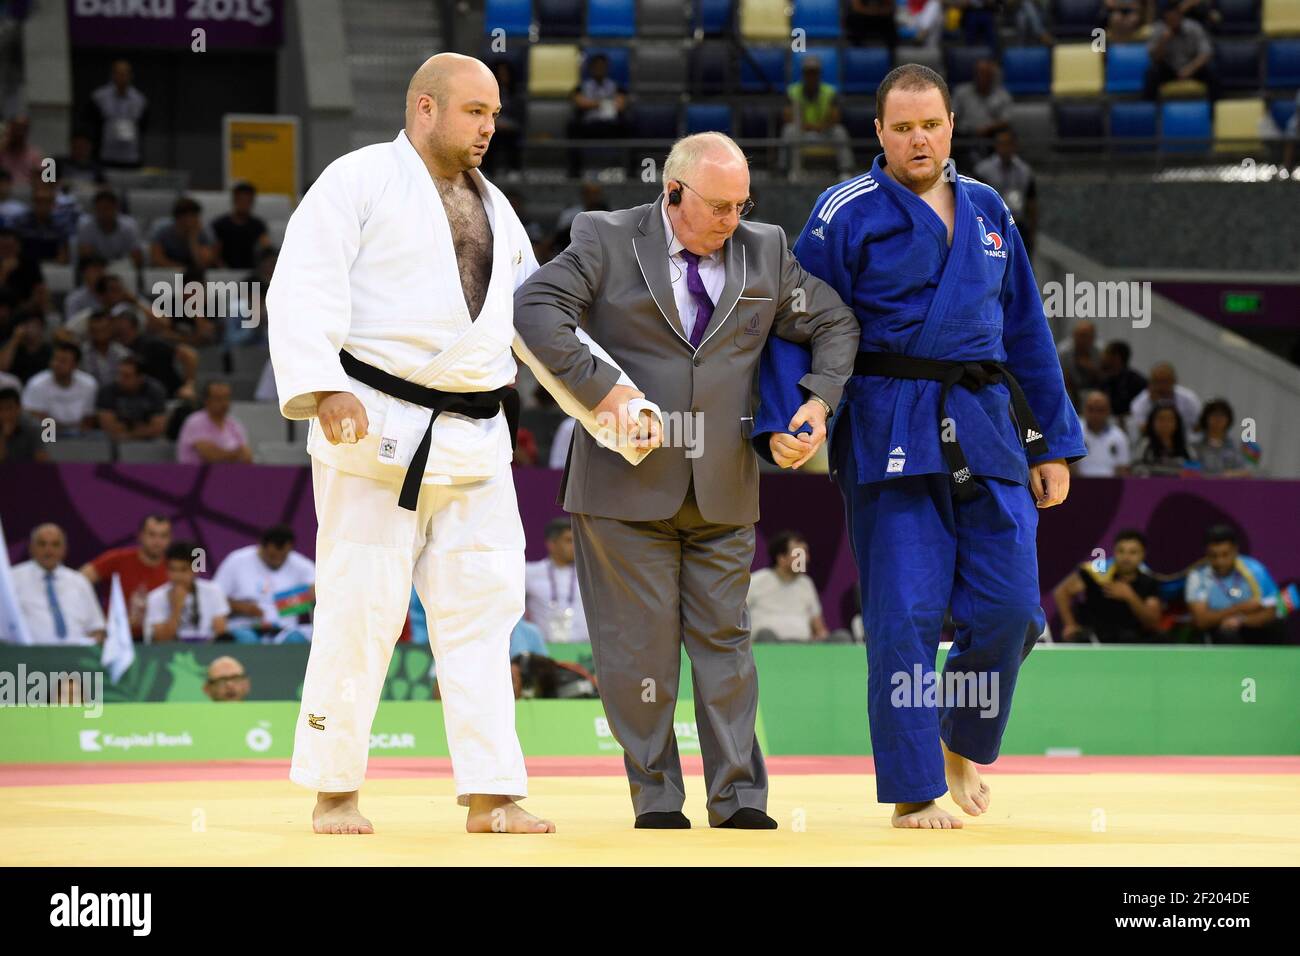 Julien Taurines of France (blue) competes in Judo Blind Men's +90kg against  Aleksandr Parasiuk of Russia (white) during the 1st European Games 2015 in  Baku, Azerbaijan, Day 14, on June 26, 2015 -